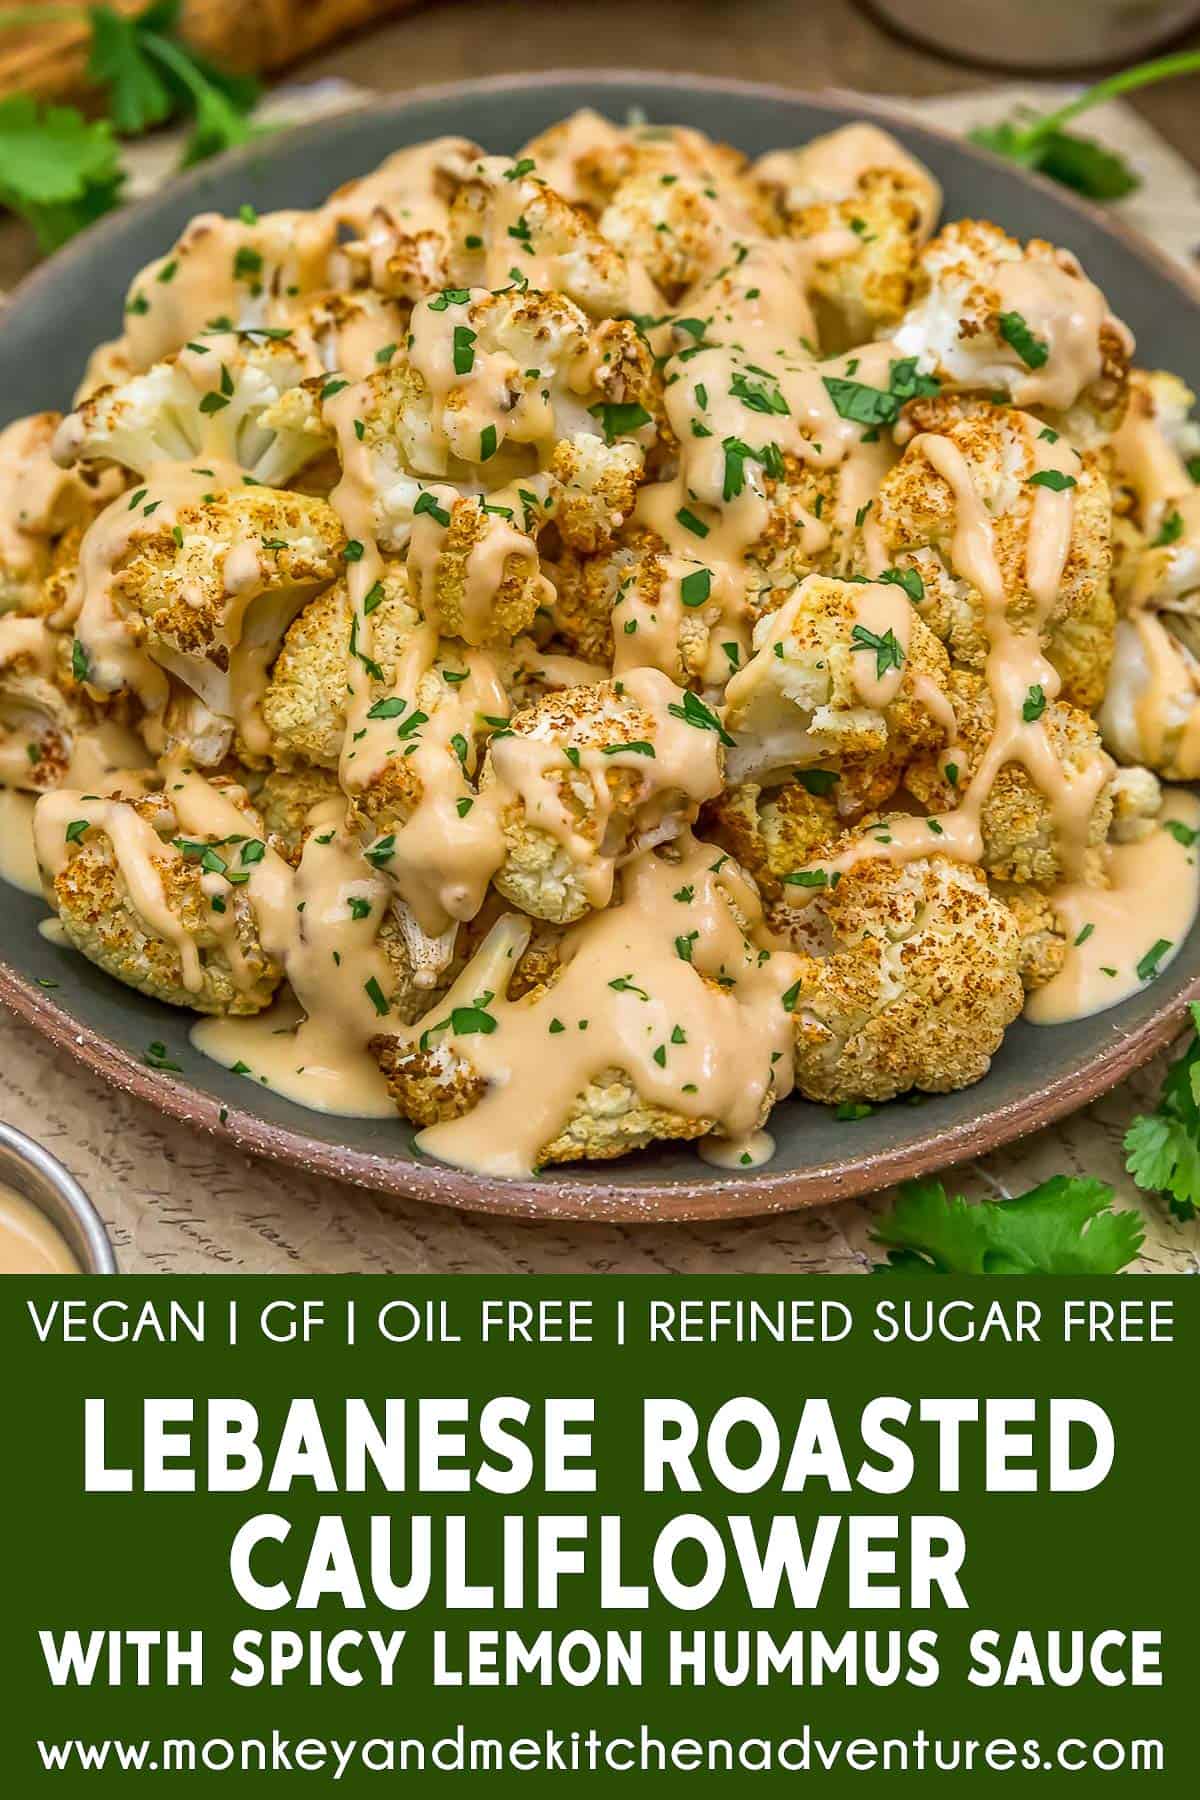 Lebanese Roasted Cauliflower with Spicy Lemon Hummus Sauce with text description